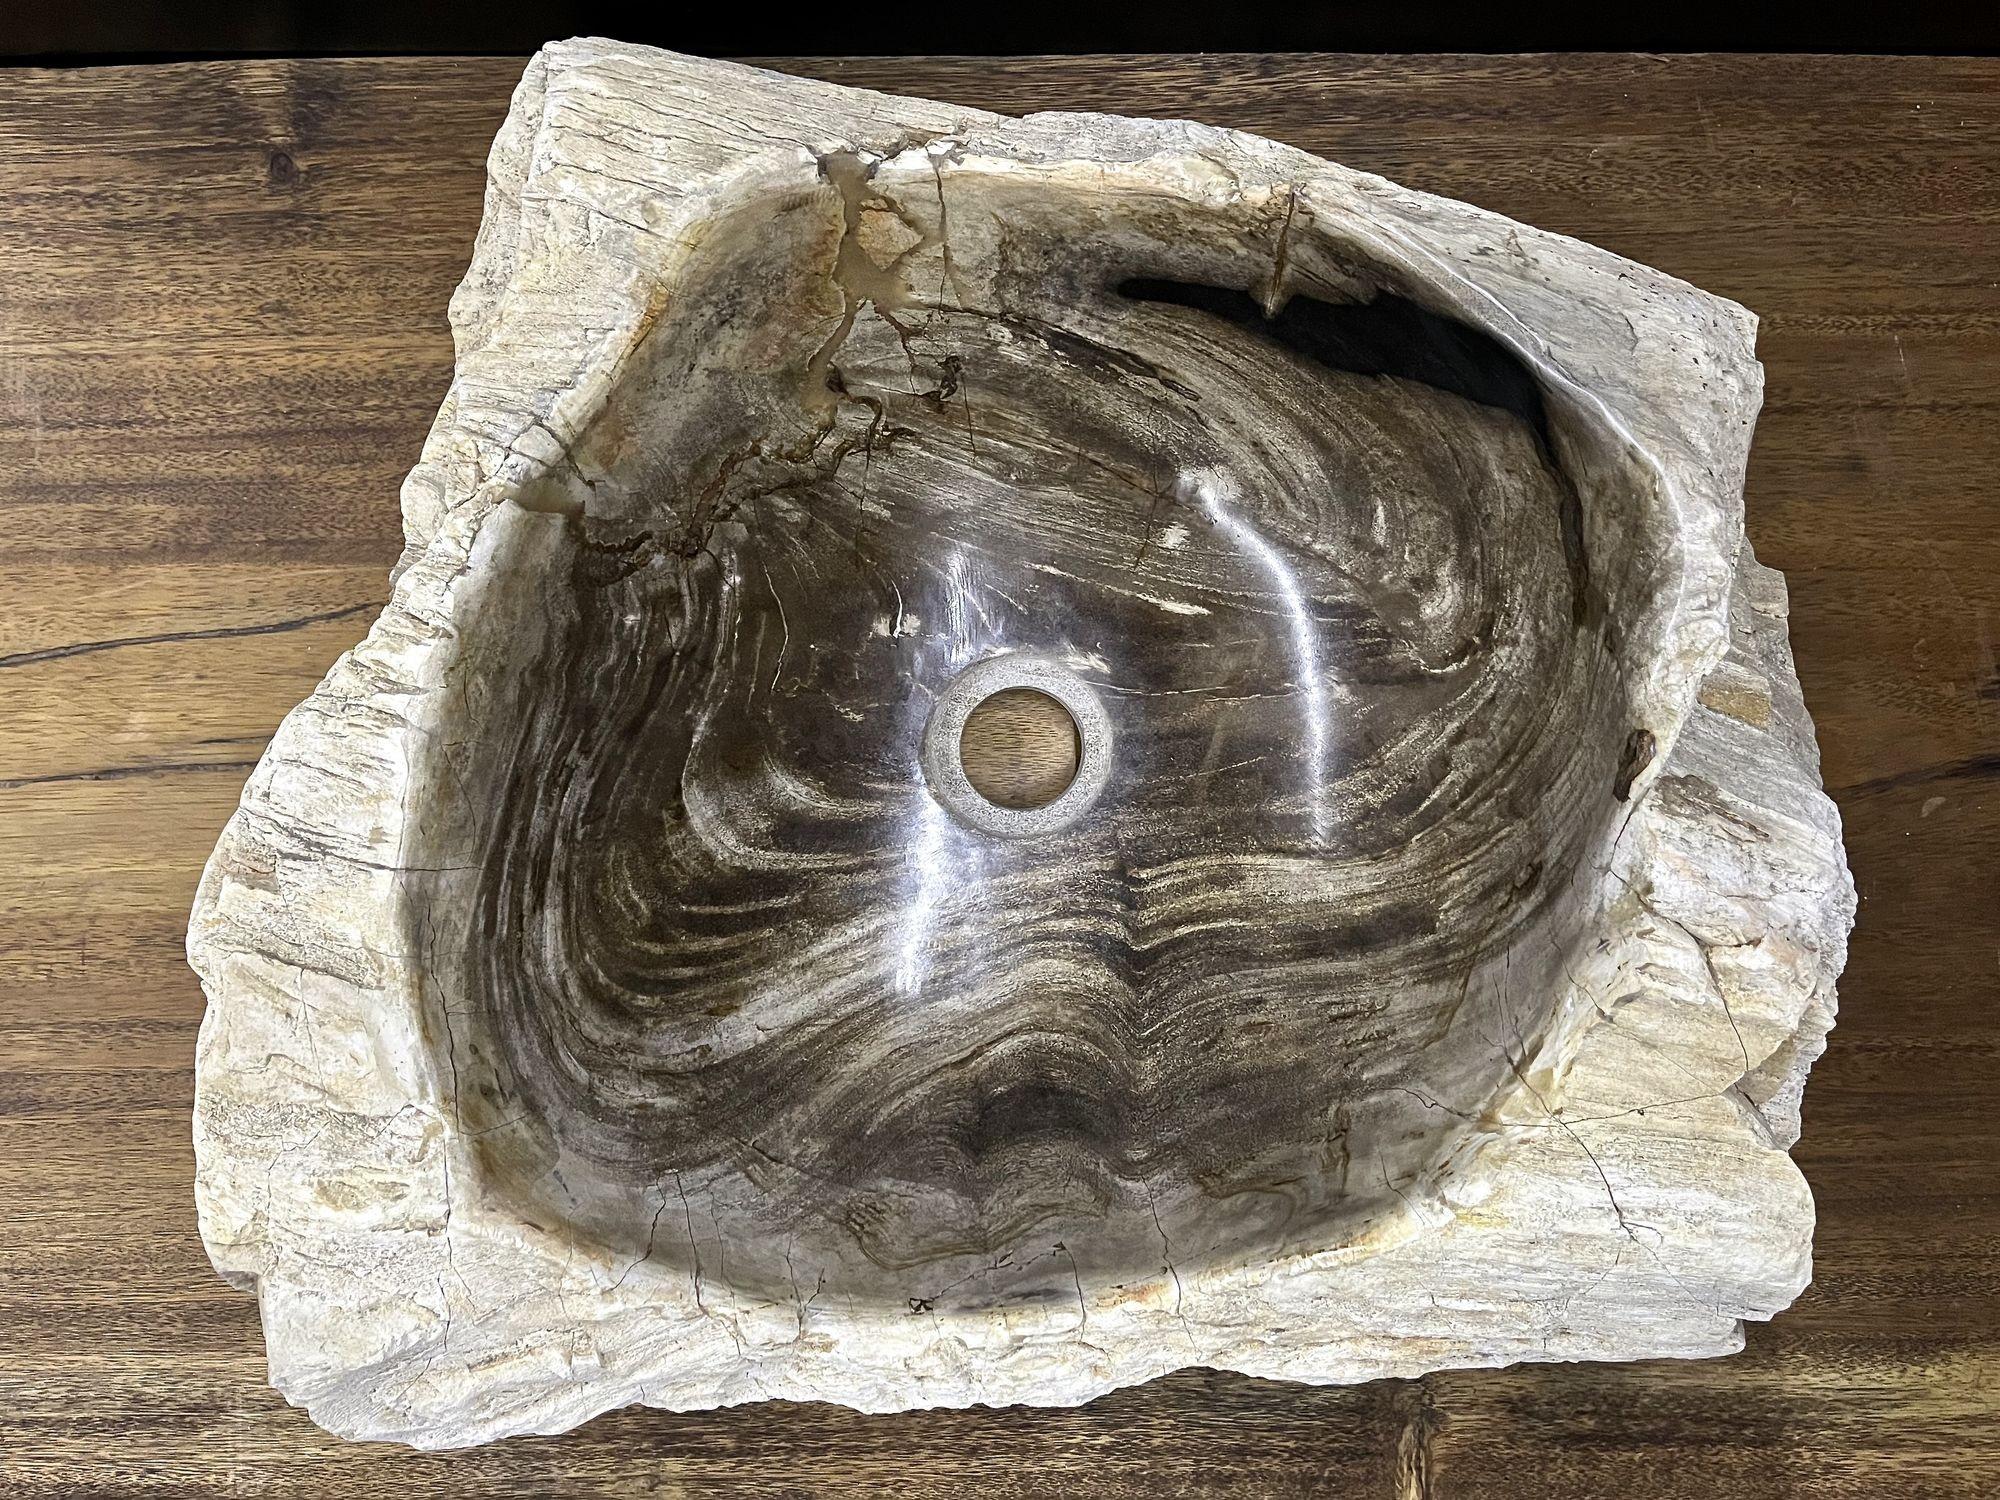 Exceptional Petrified Wood Sink in absolute top quality. This one of a kind, organic modern sink impresses with its extraordinary shape and fantastic patterns in different beautiful brown, grey and beige tones. The inside of the sink comes with a